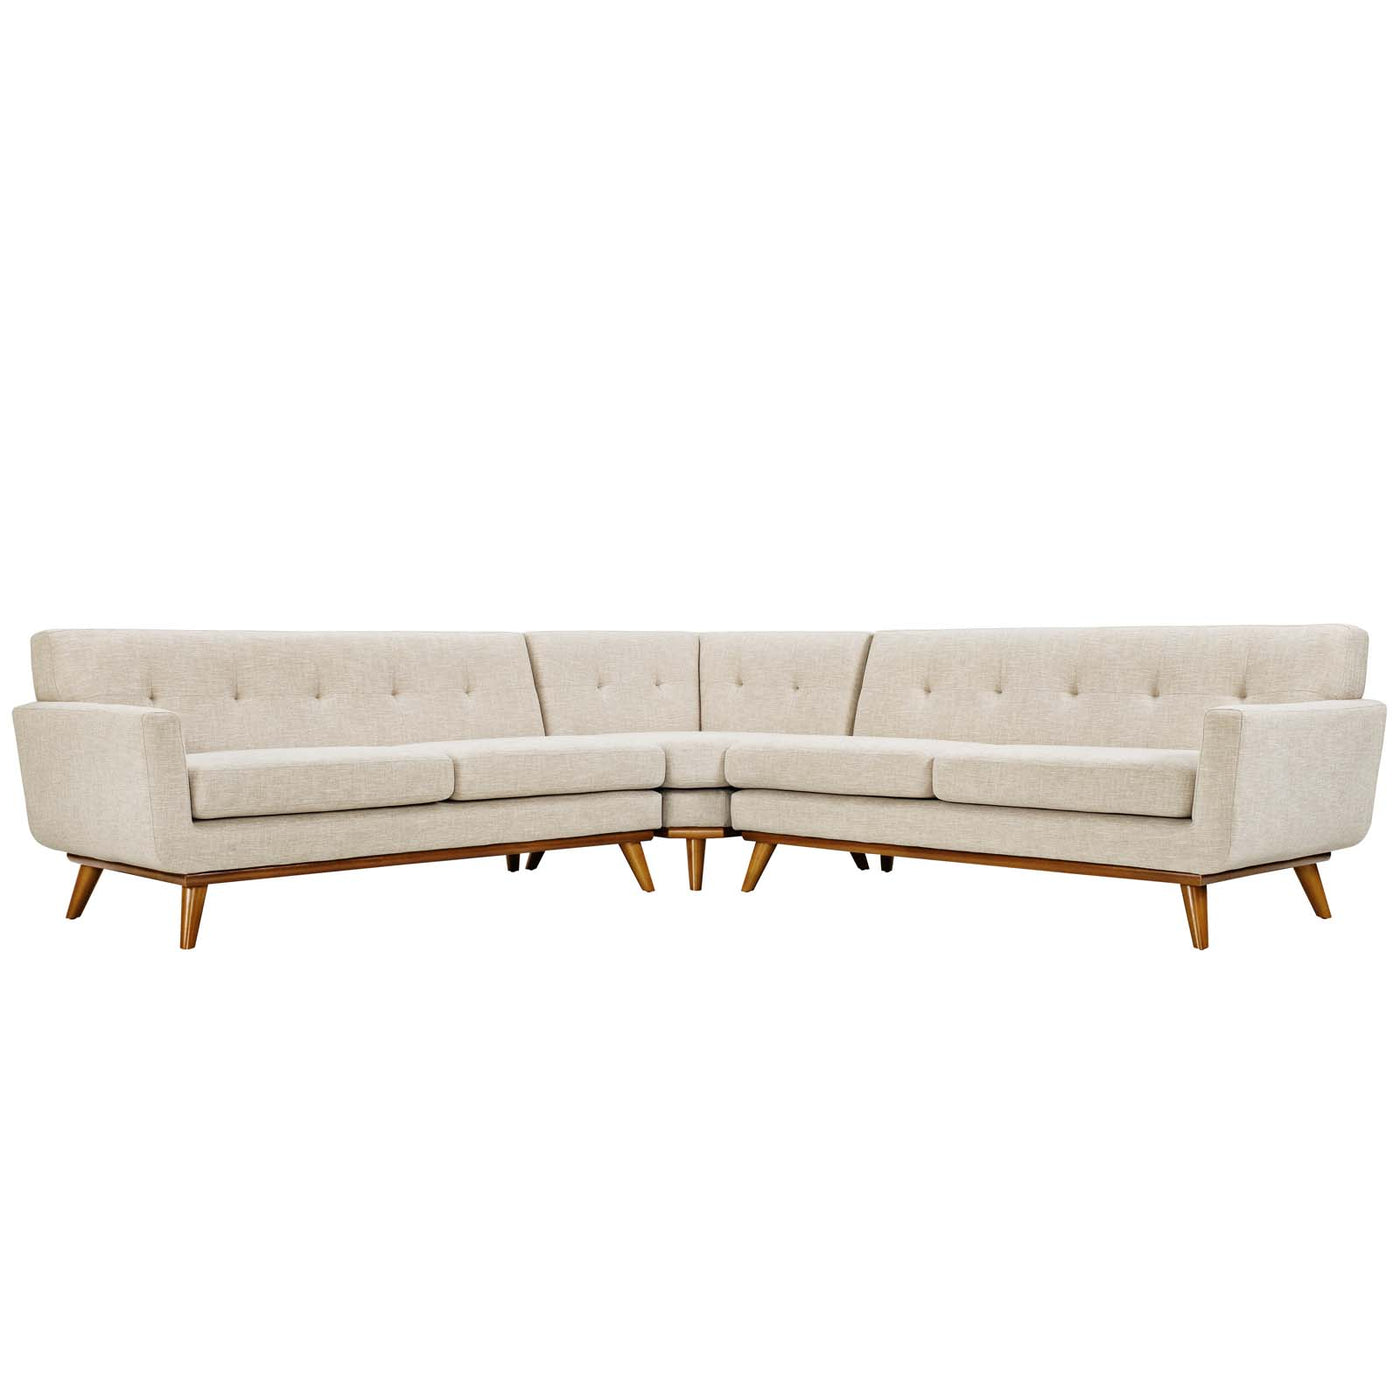 Engage L-Shaped Upholstered Fabric Sectional Sofa